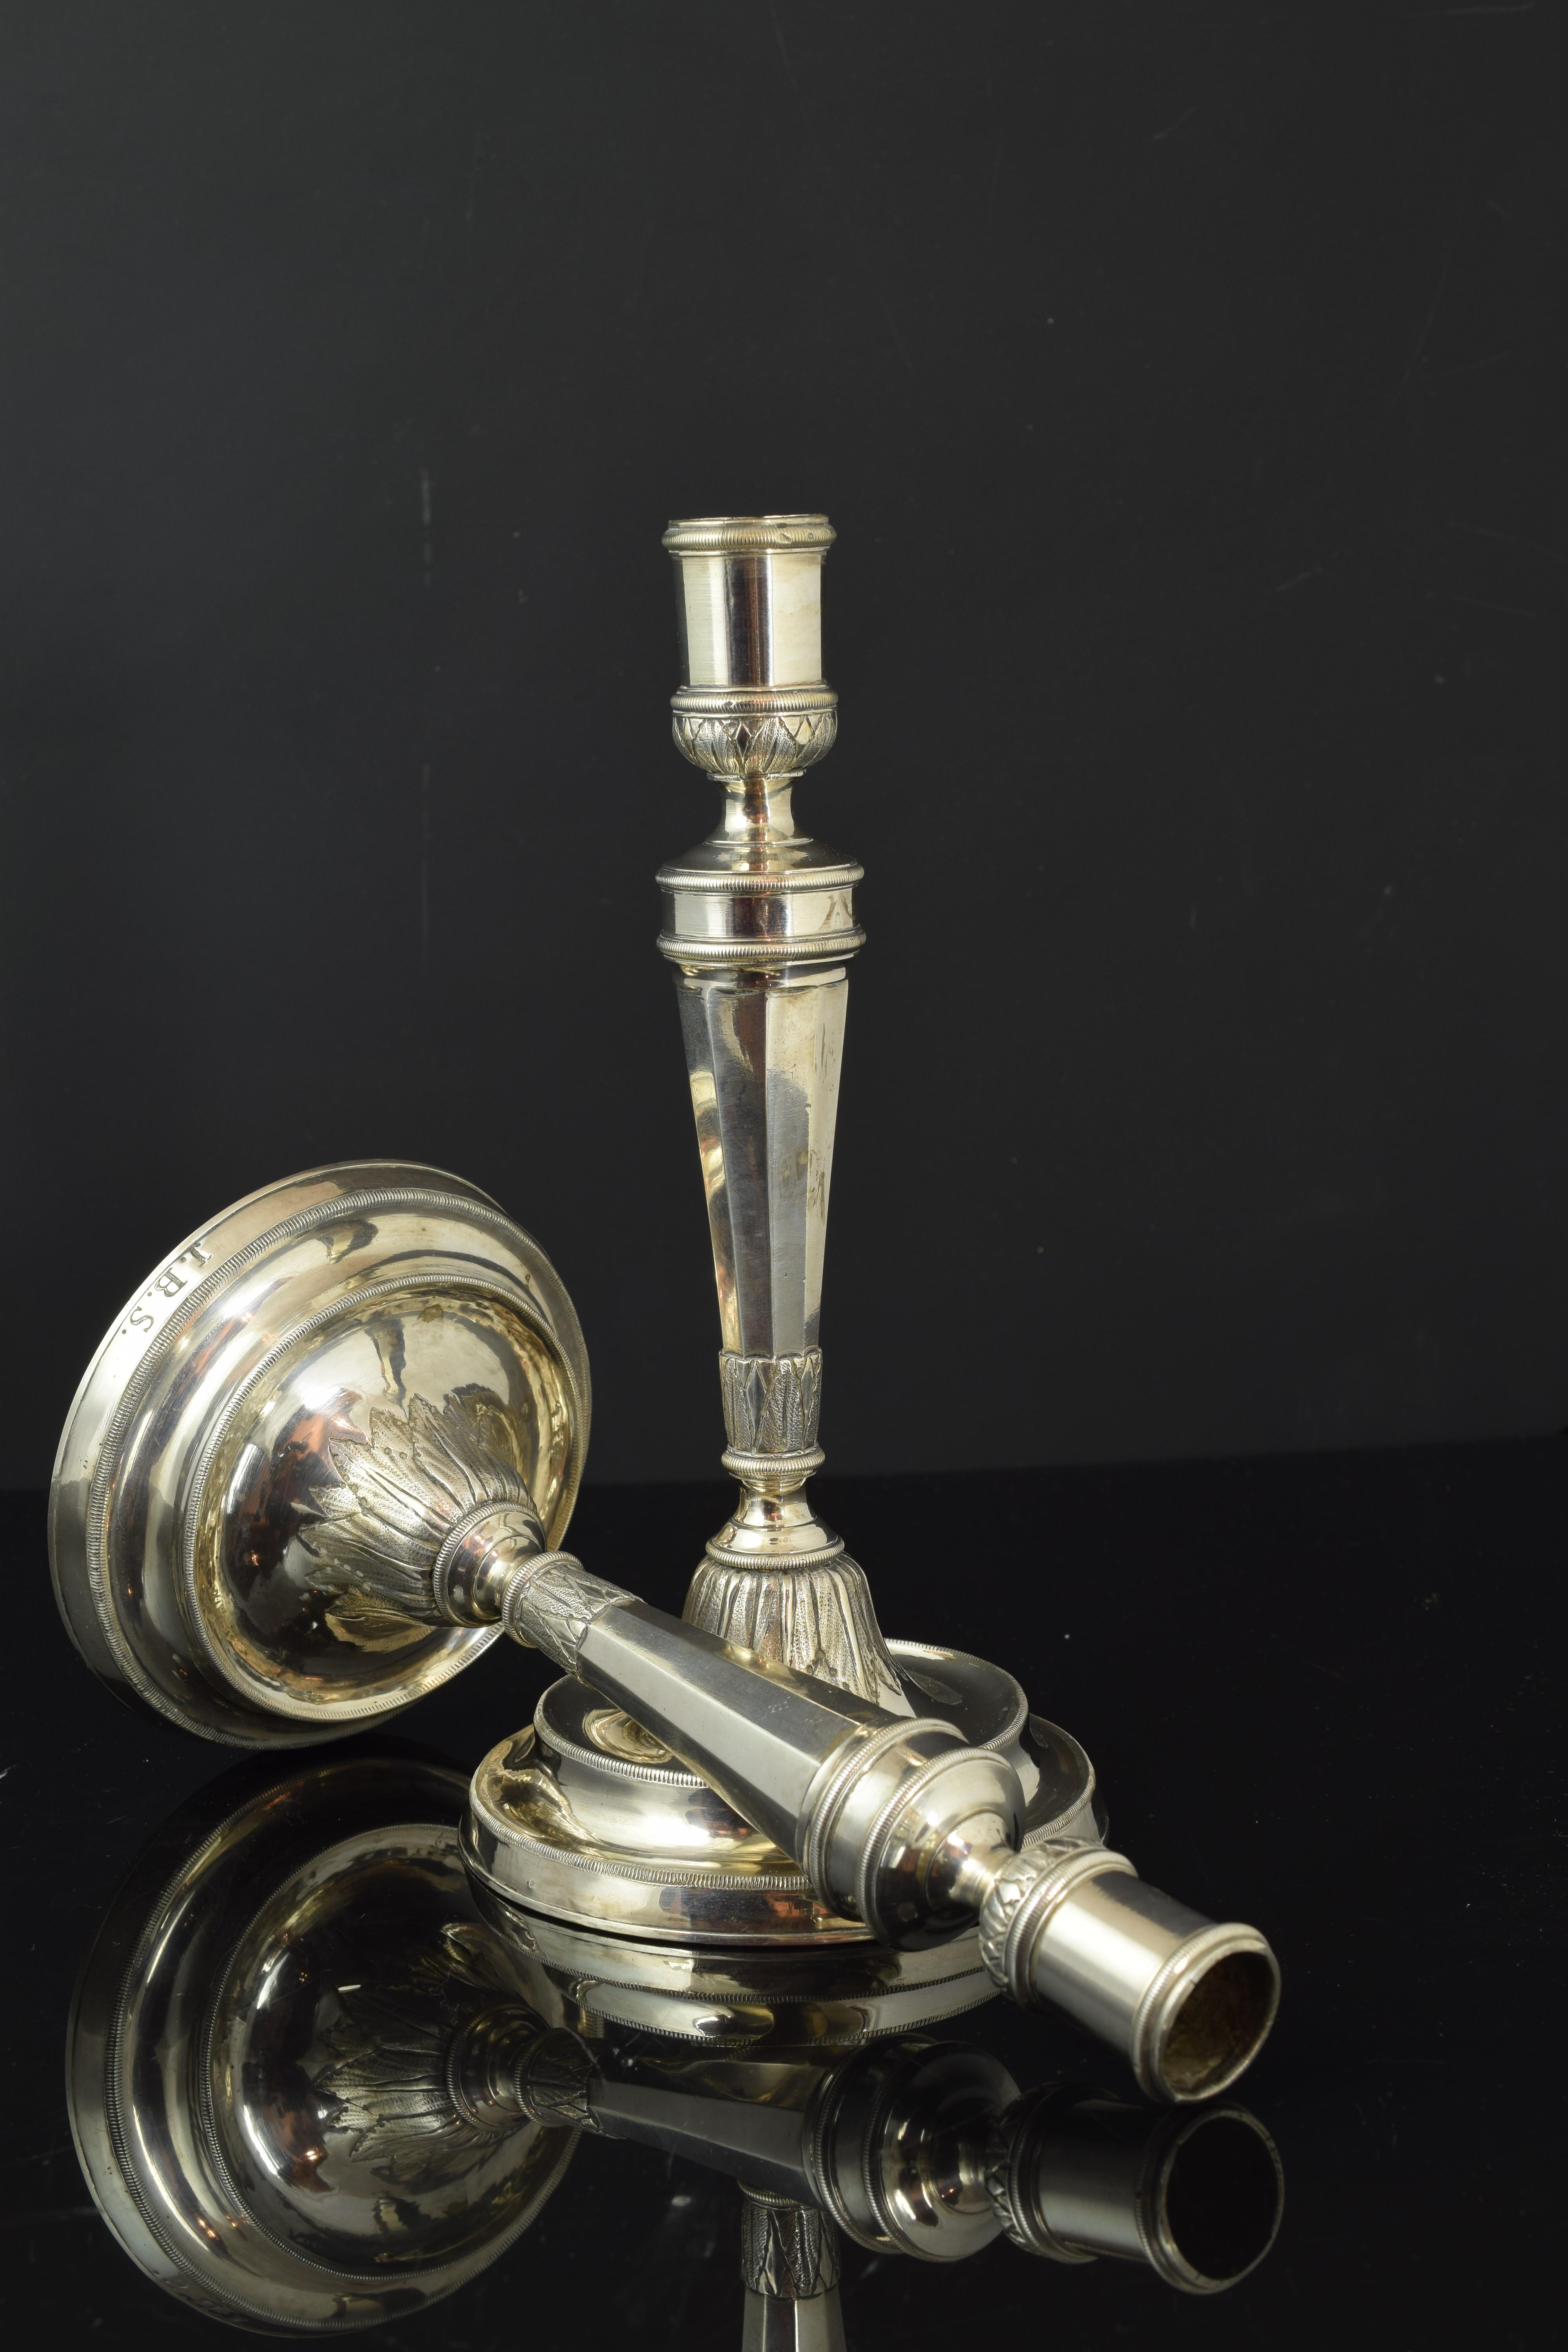 Pair of candlesticks with a circular base, in which initials are presented, with a column-shaped axis with a bell-shaped base decorated with leaves in slight relief. The shapes and moldings that decorate them respond to the influence of